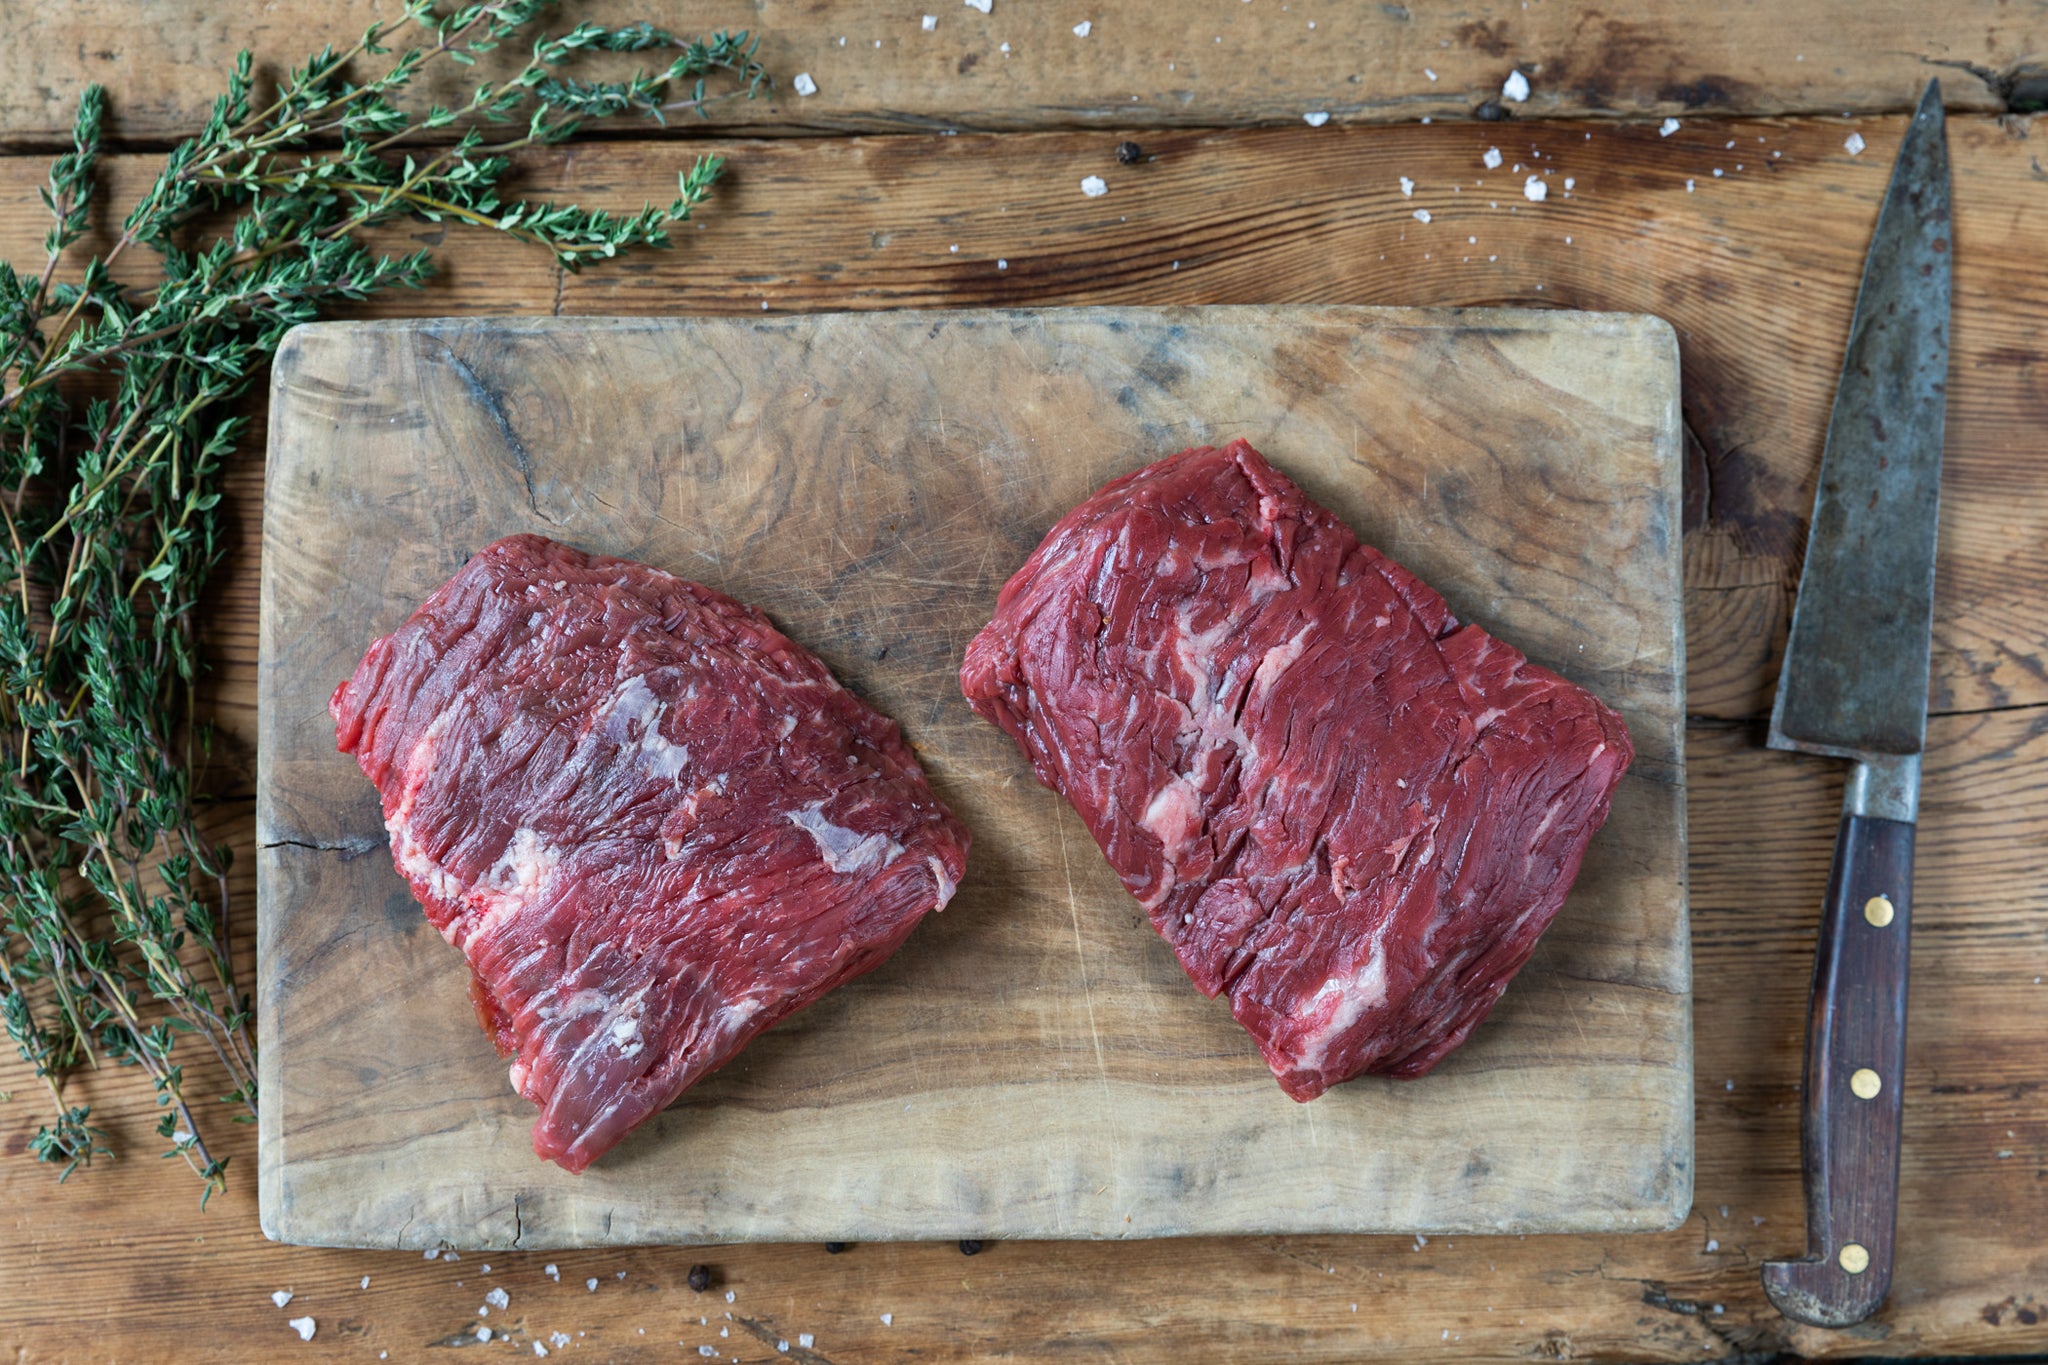 grass-fed heritage breed dry-aged raw bavette steaks